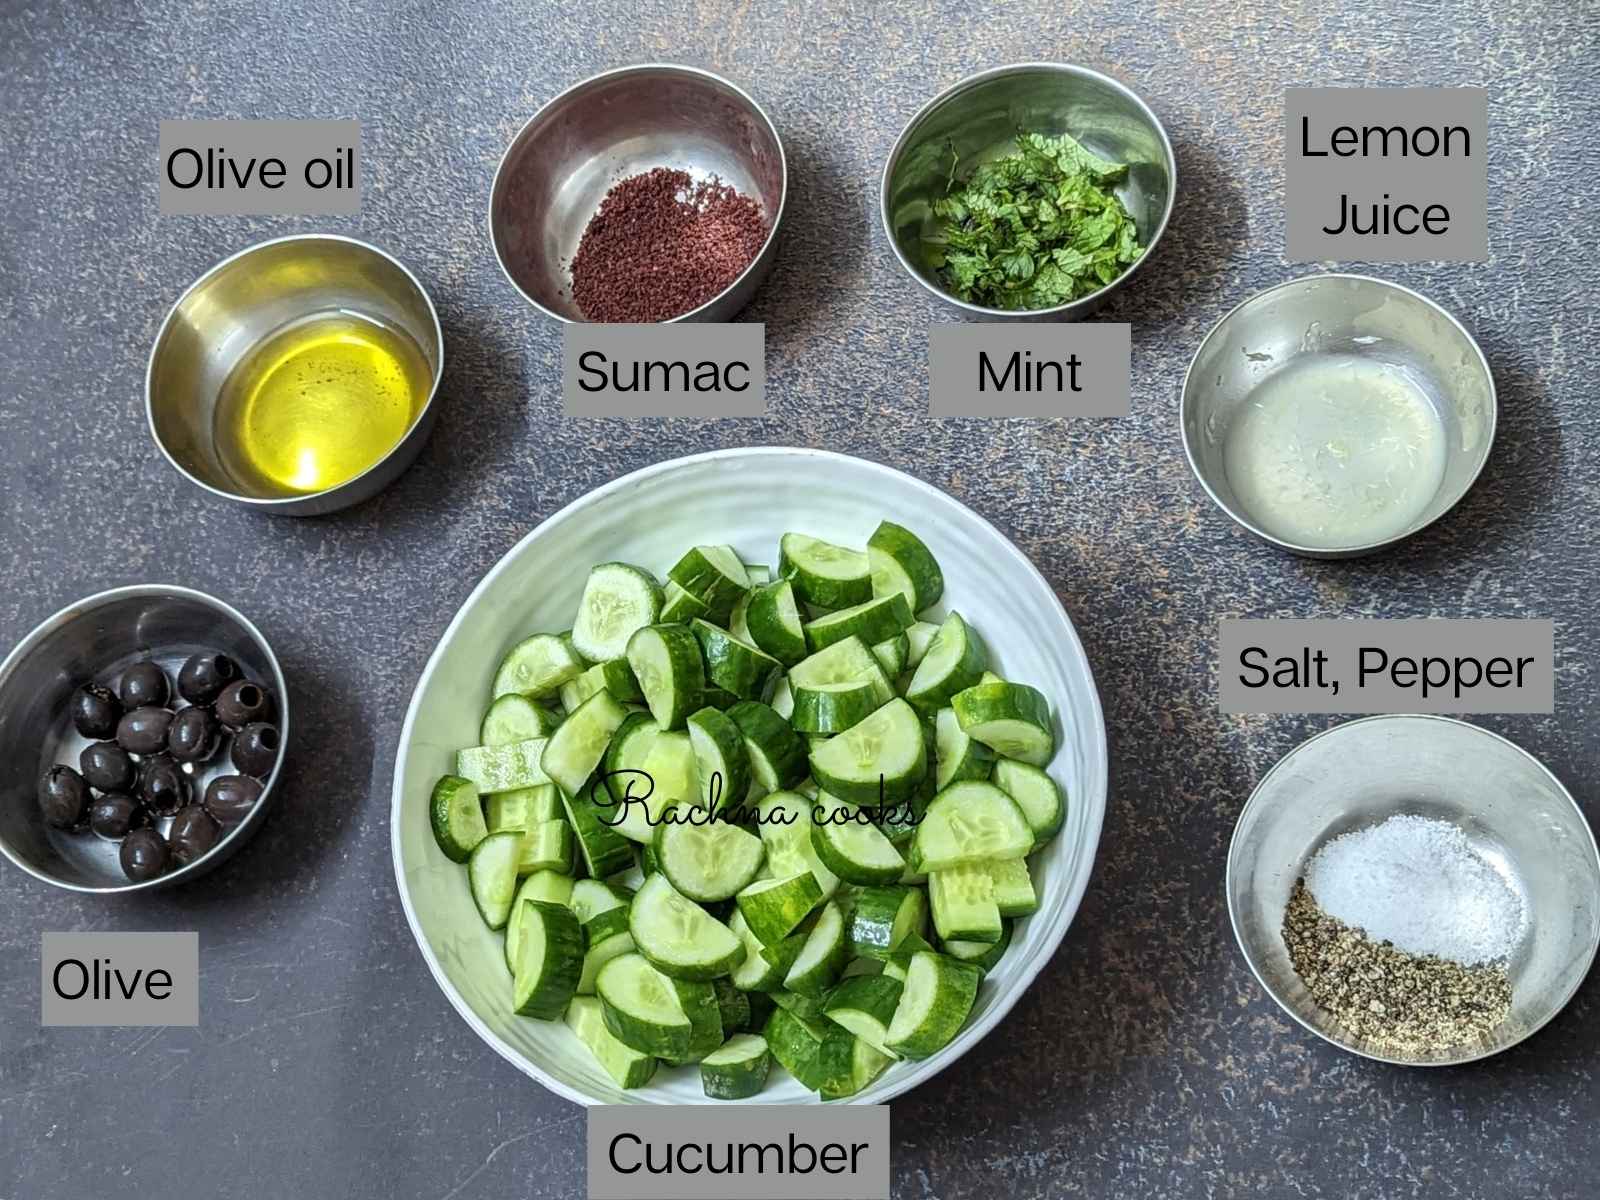 Ingredients for making sumac cucumber salad in bowls: Olive oil, chopped cucumbers, salt, pepper, sumac, mint, lemon juice and olives